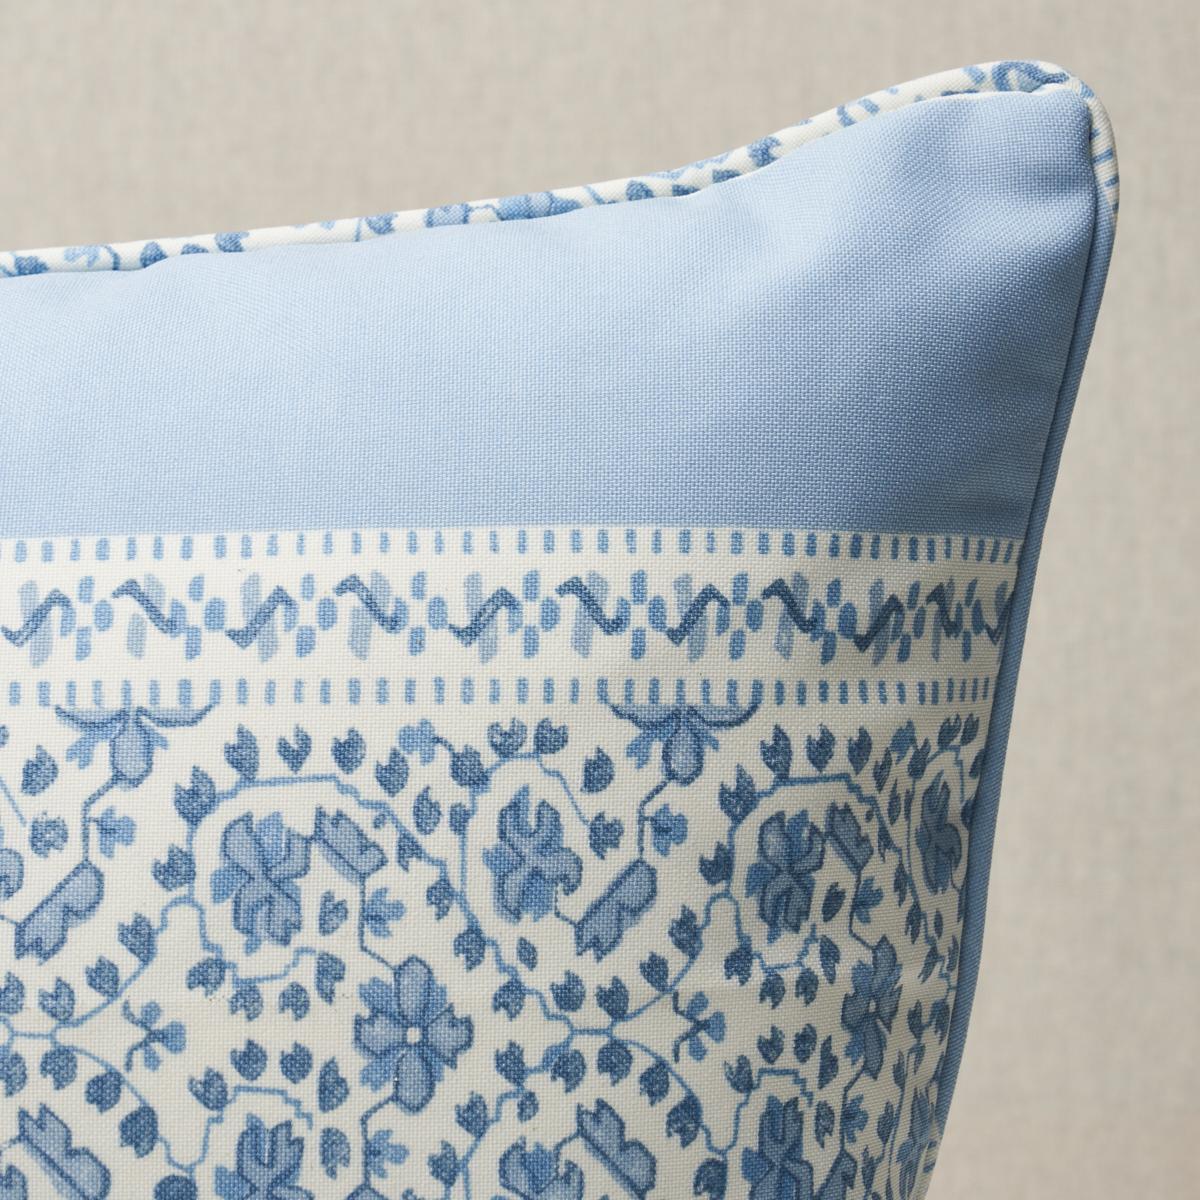 This pillow features Jasmine Indoor/Outdoor by Mark D. Sikes for Schumacher with a self welt finish. Inspired by traditional Indian block prints, Jasmine Indoor/Outdoor in indigo by Mark D. Sikes is a stylish high-performance fabric that can stand